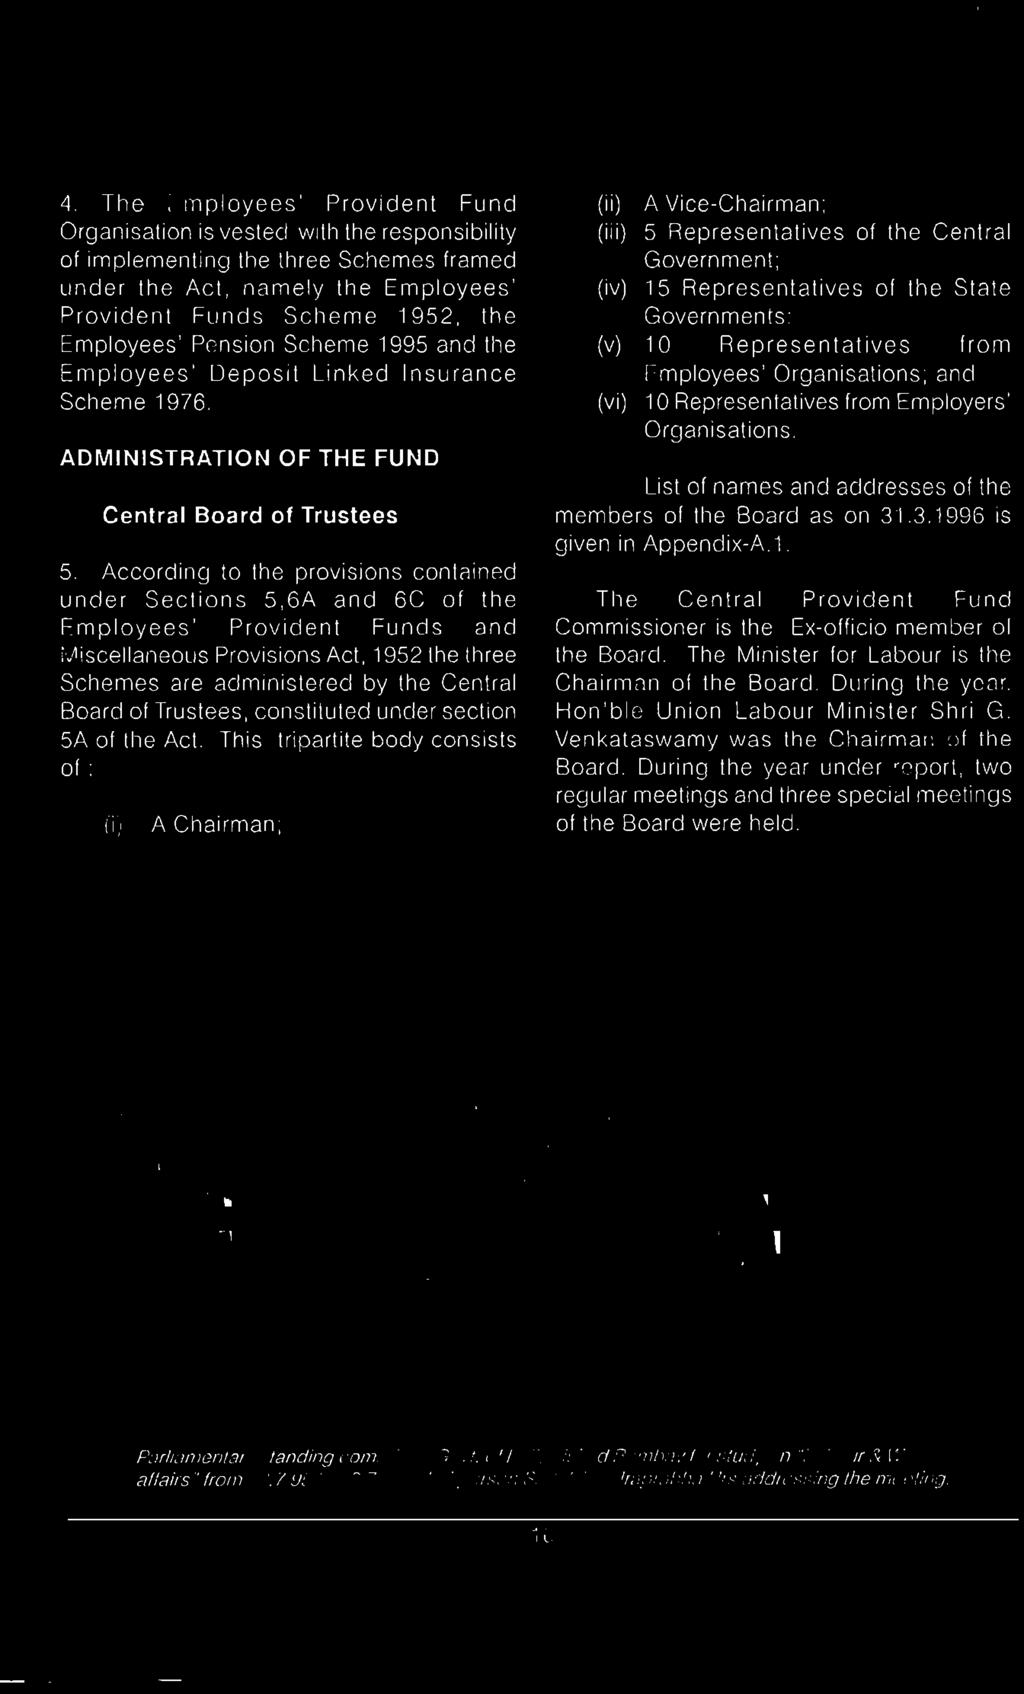 This tripartite body consists of : (i) A Chairman; (ii) A Vice-Chairman; (iii) 5 Representatives of the Central Government; (iv) 15 Representatives of the State Governments: (v) 10 Representatives